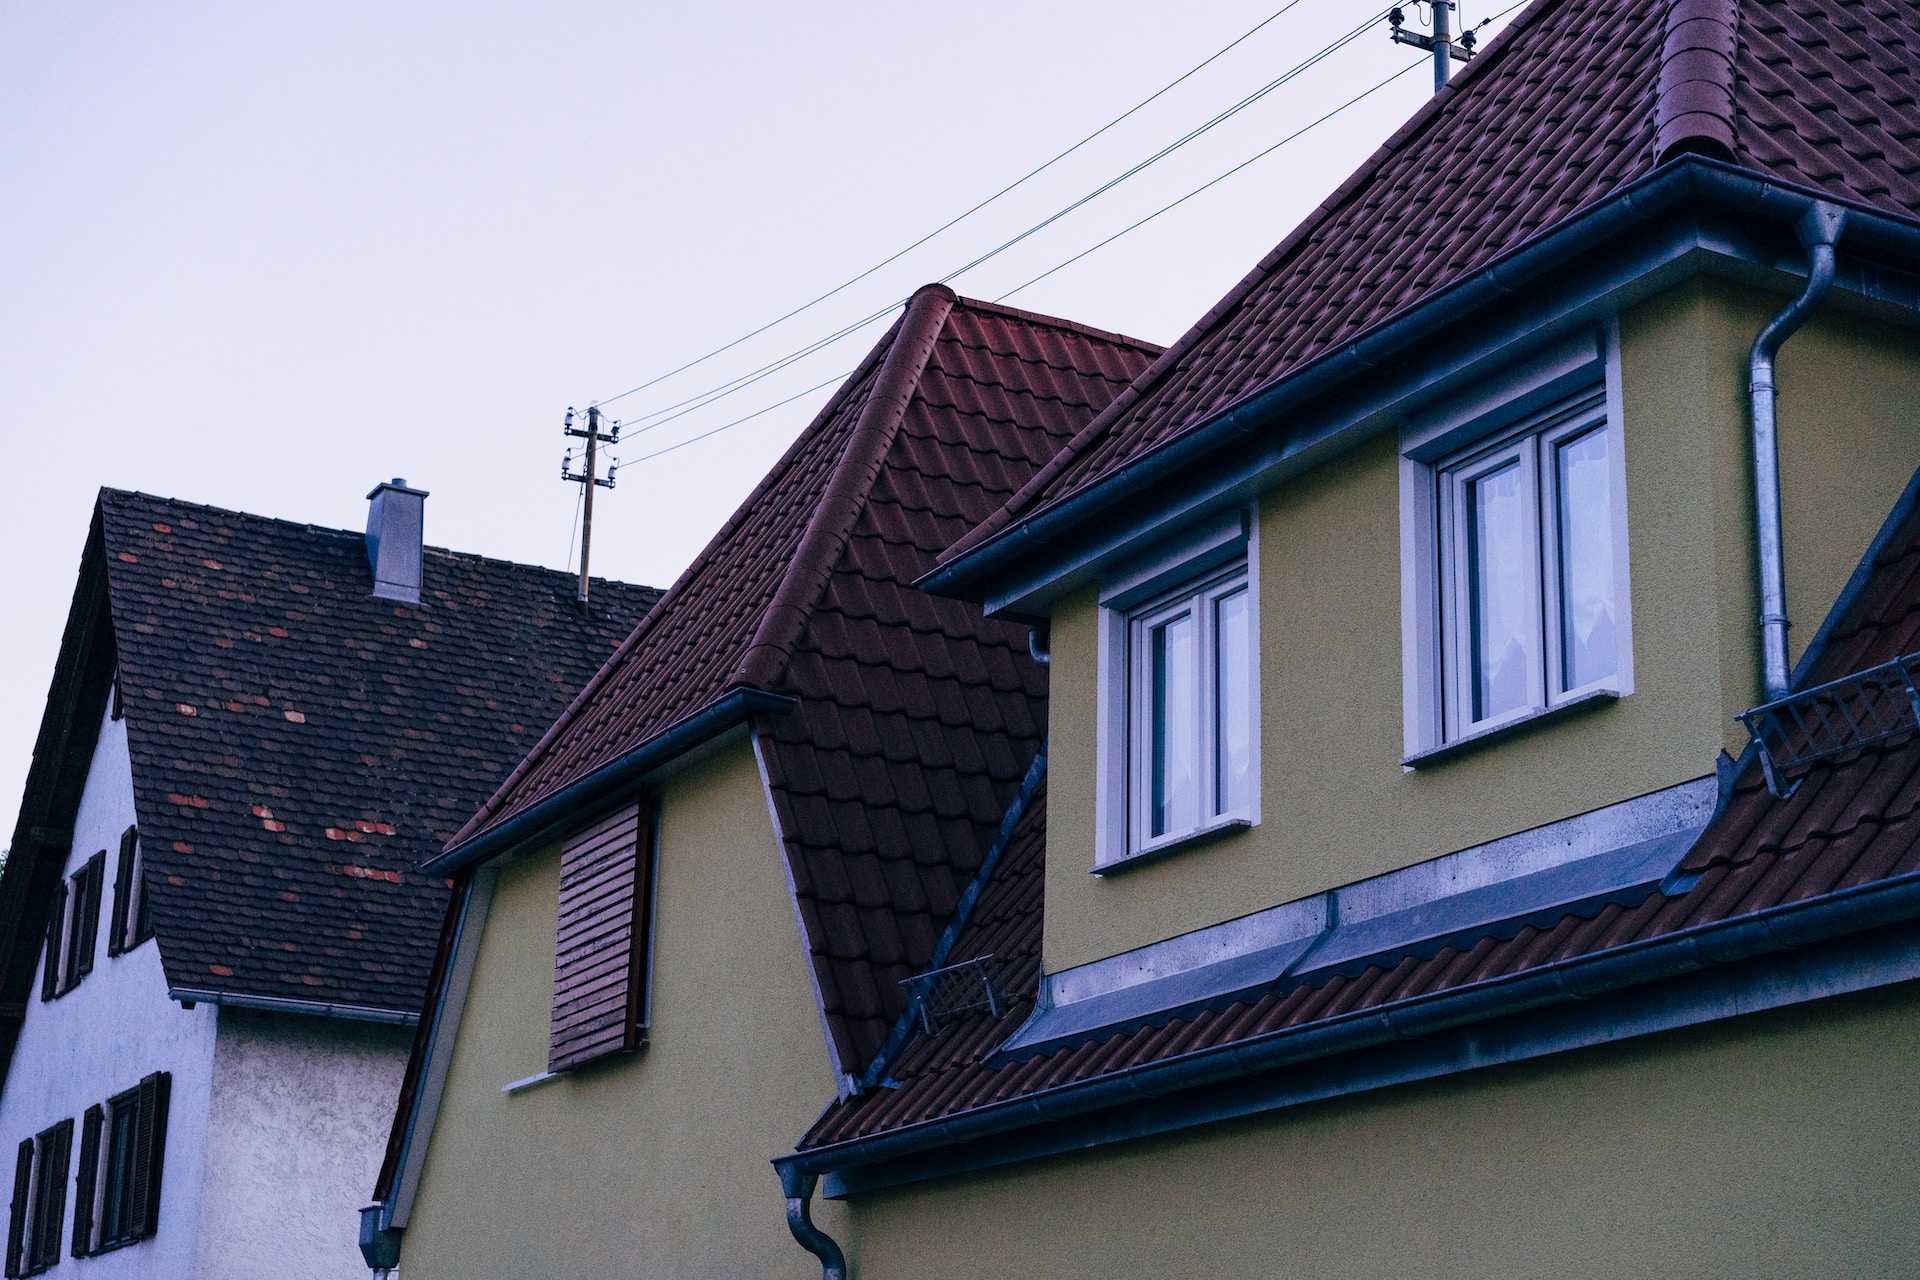 houses with metal roofs